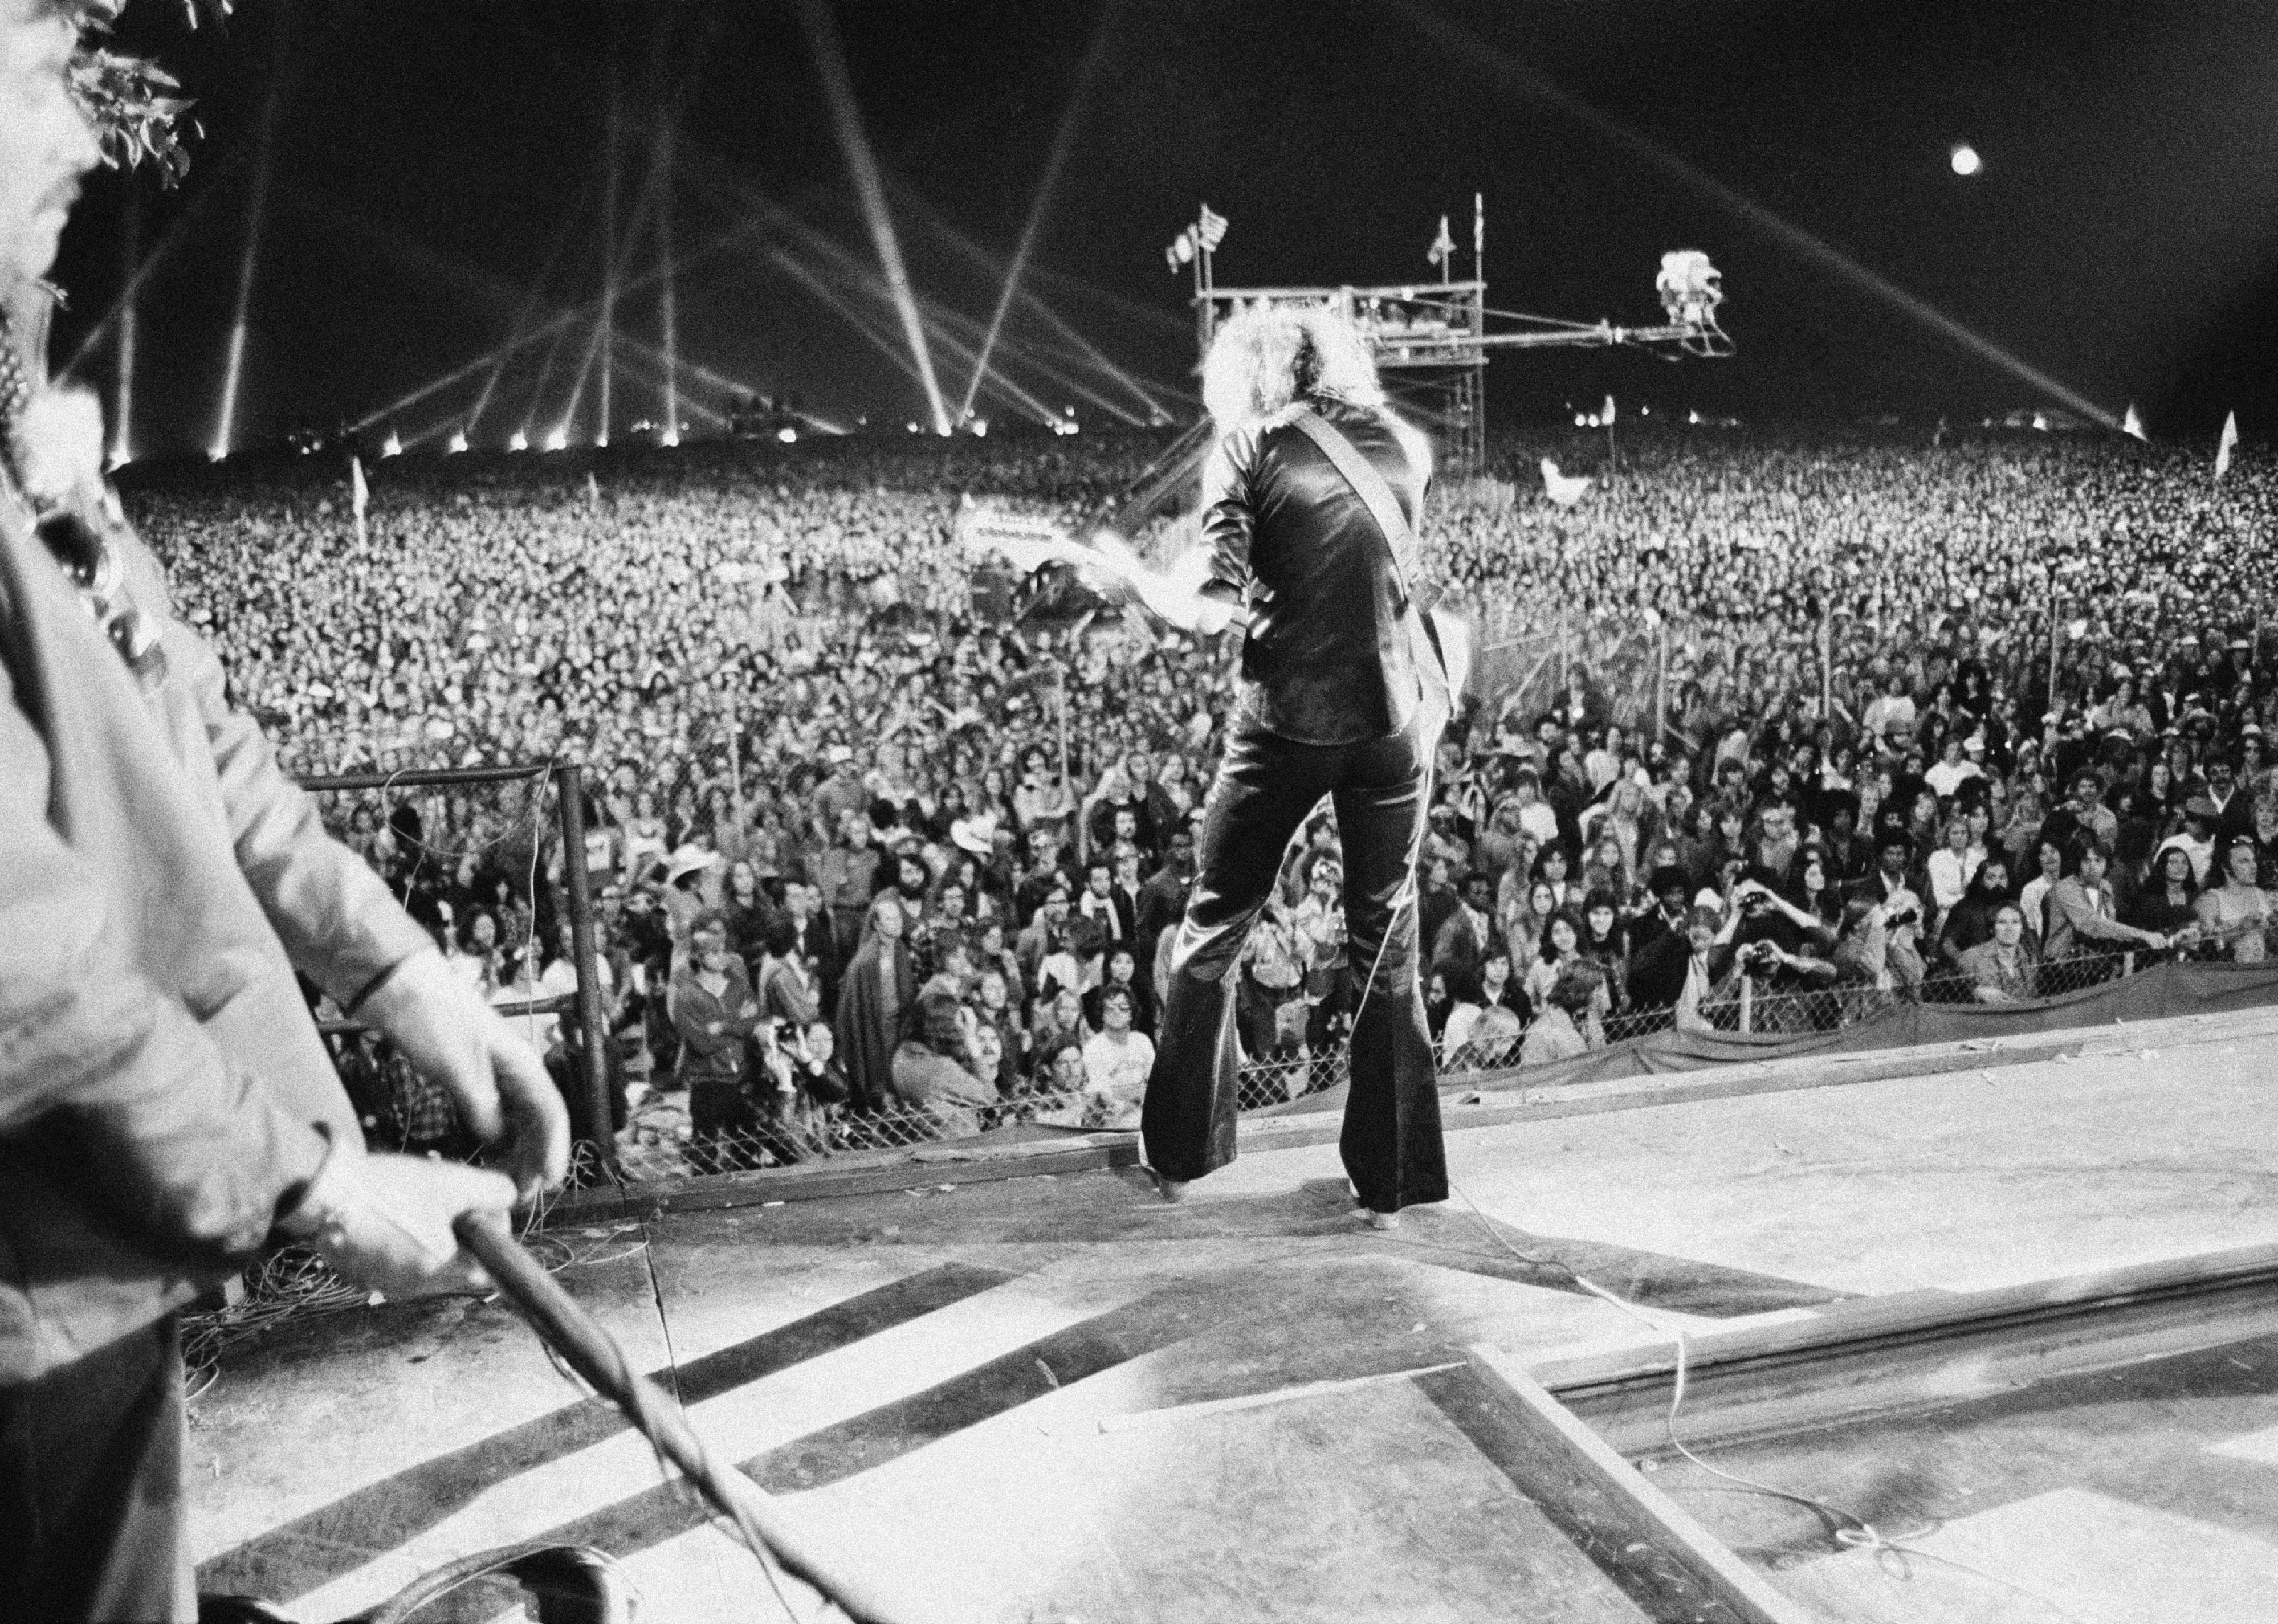 <p>A crowd of over 200,000 people gathered for this epic concert festival, leading to all kinds of <a href="https://www.dailybulletin.com/2014/04/04/california-jam-festival-rocked-ontario-in-1974/">crazy parking and traffic issues</a>. Co-headlined by ​​Deep Purple and Emerson, Lake & Palmer, it featured additional performances by Earth, Wind & Fire, Eagles, Black Sabbath, and others. Highlights of the event were televised on ABC.</p> <p><strong>You may also like:</strong> <a href="https://stacker.com/music/25-most-covered-rock-songs-all-time">25 most covered rock songs of all time</a></p>